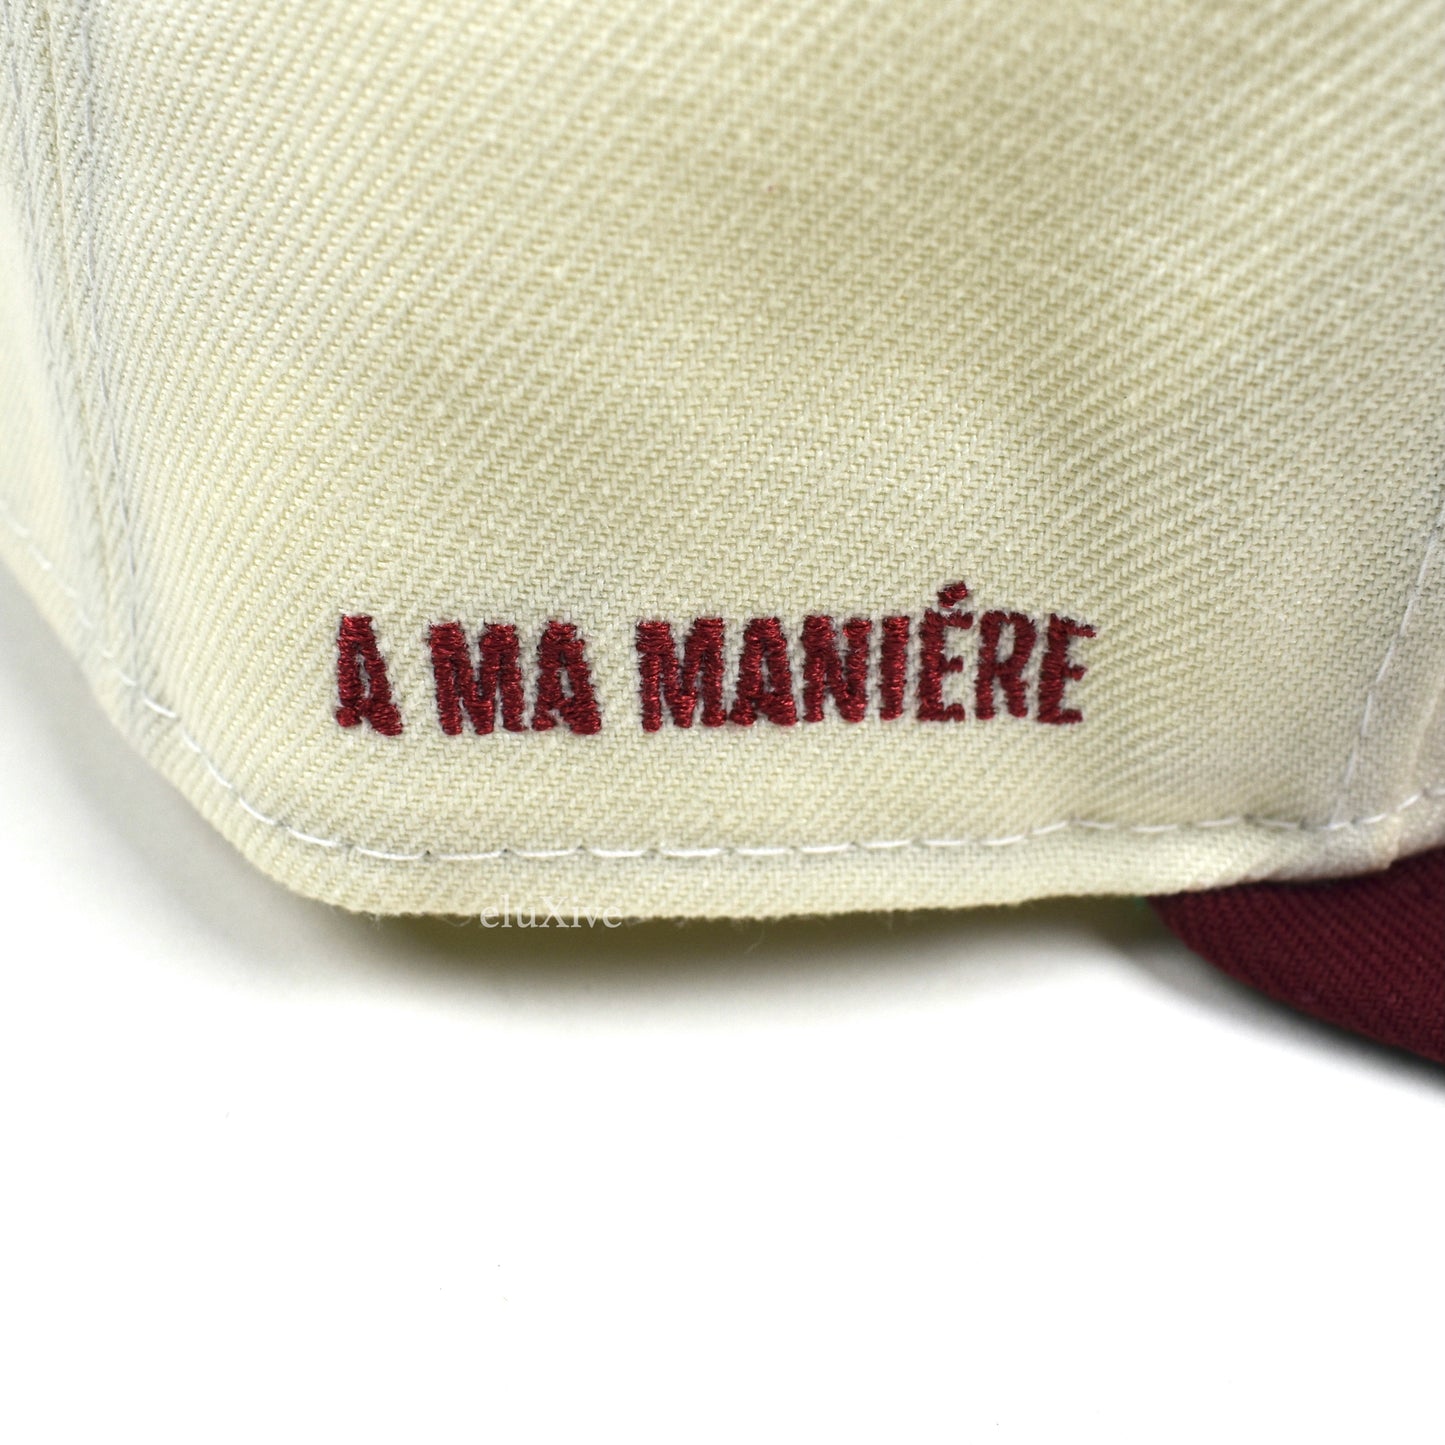 A Ma Maniere x New Era - Houston Astros Fitted Hat (Red Bill)